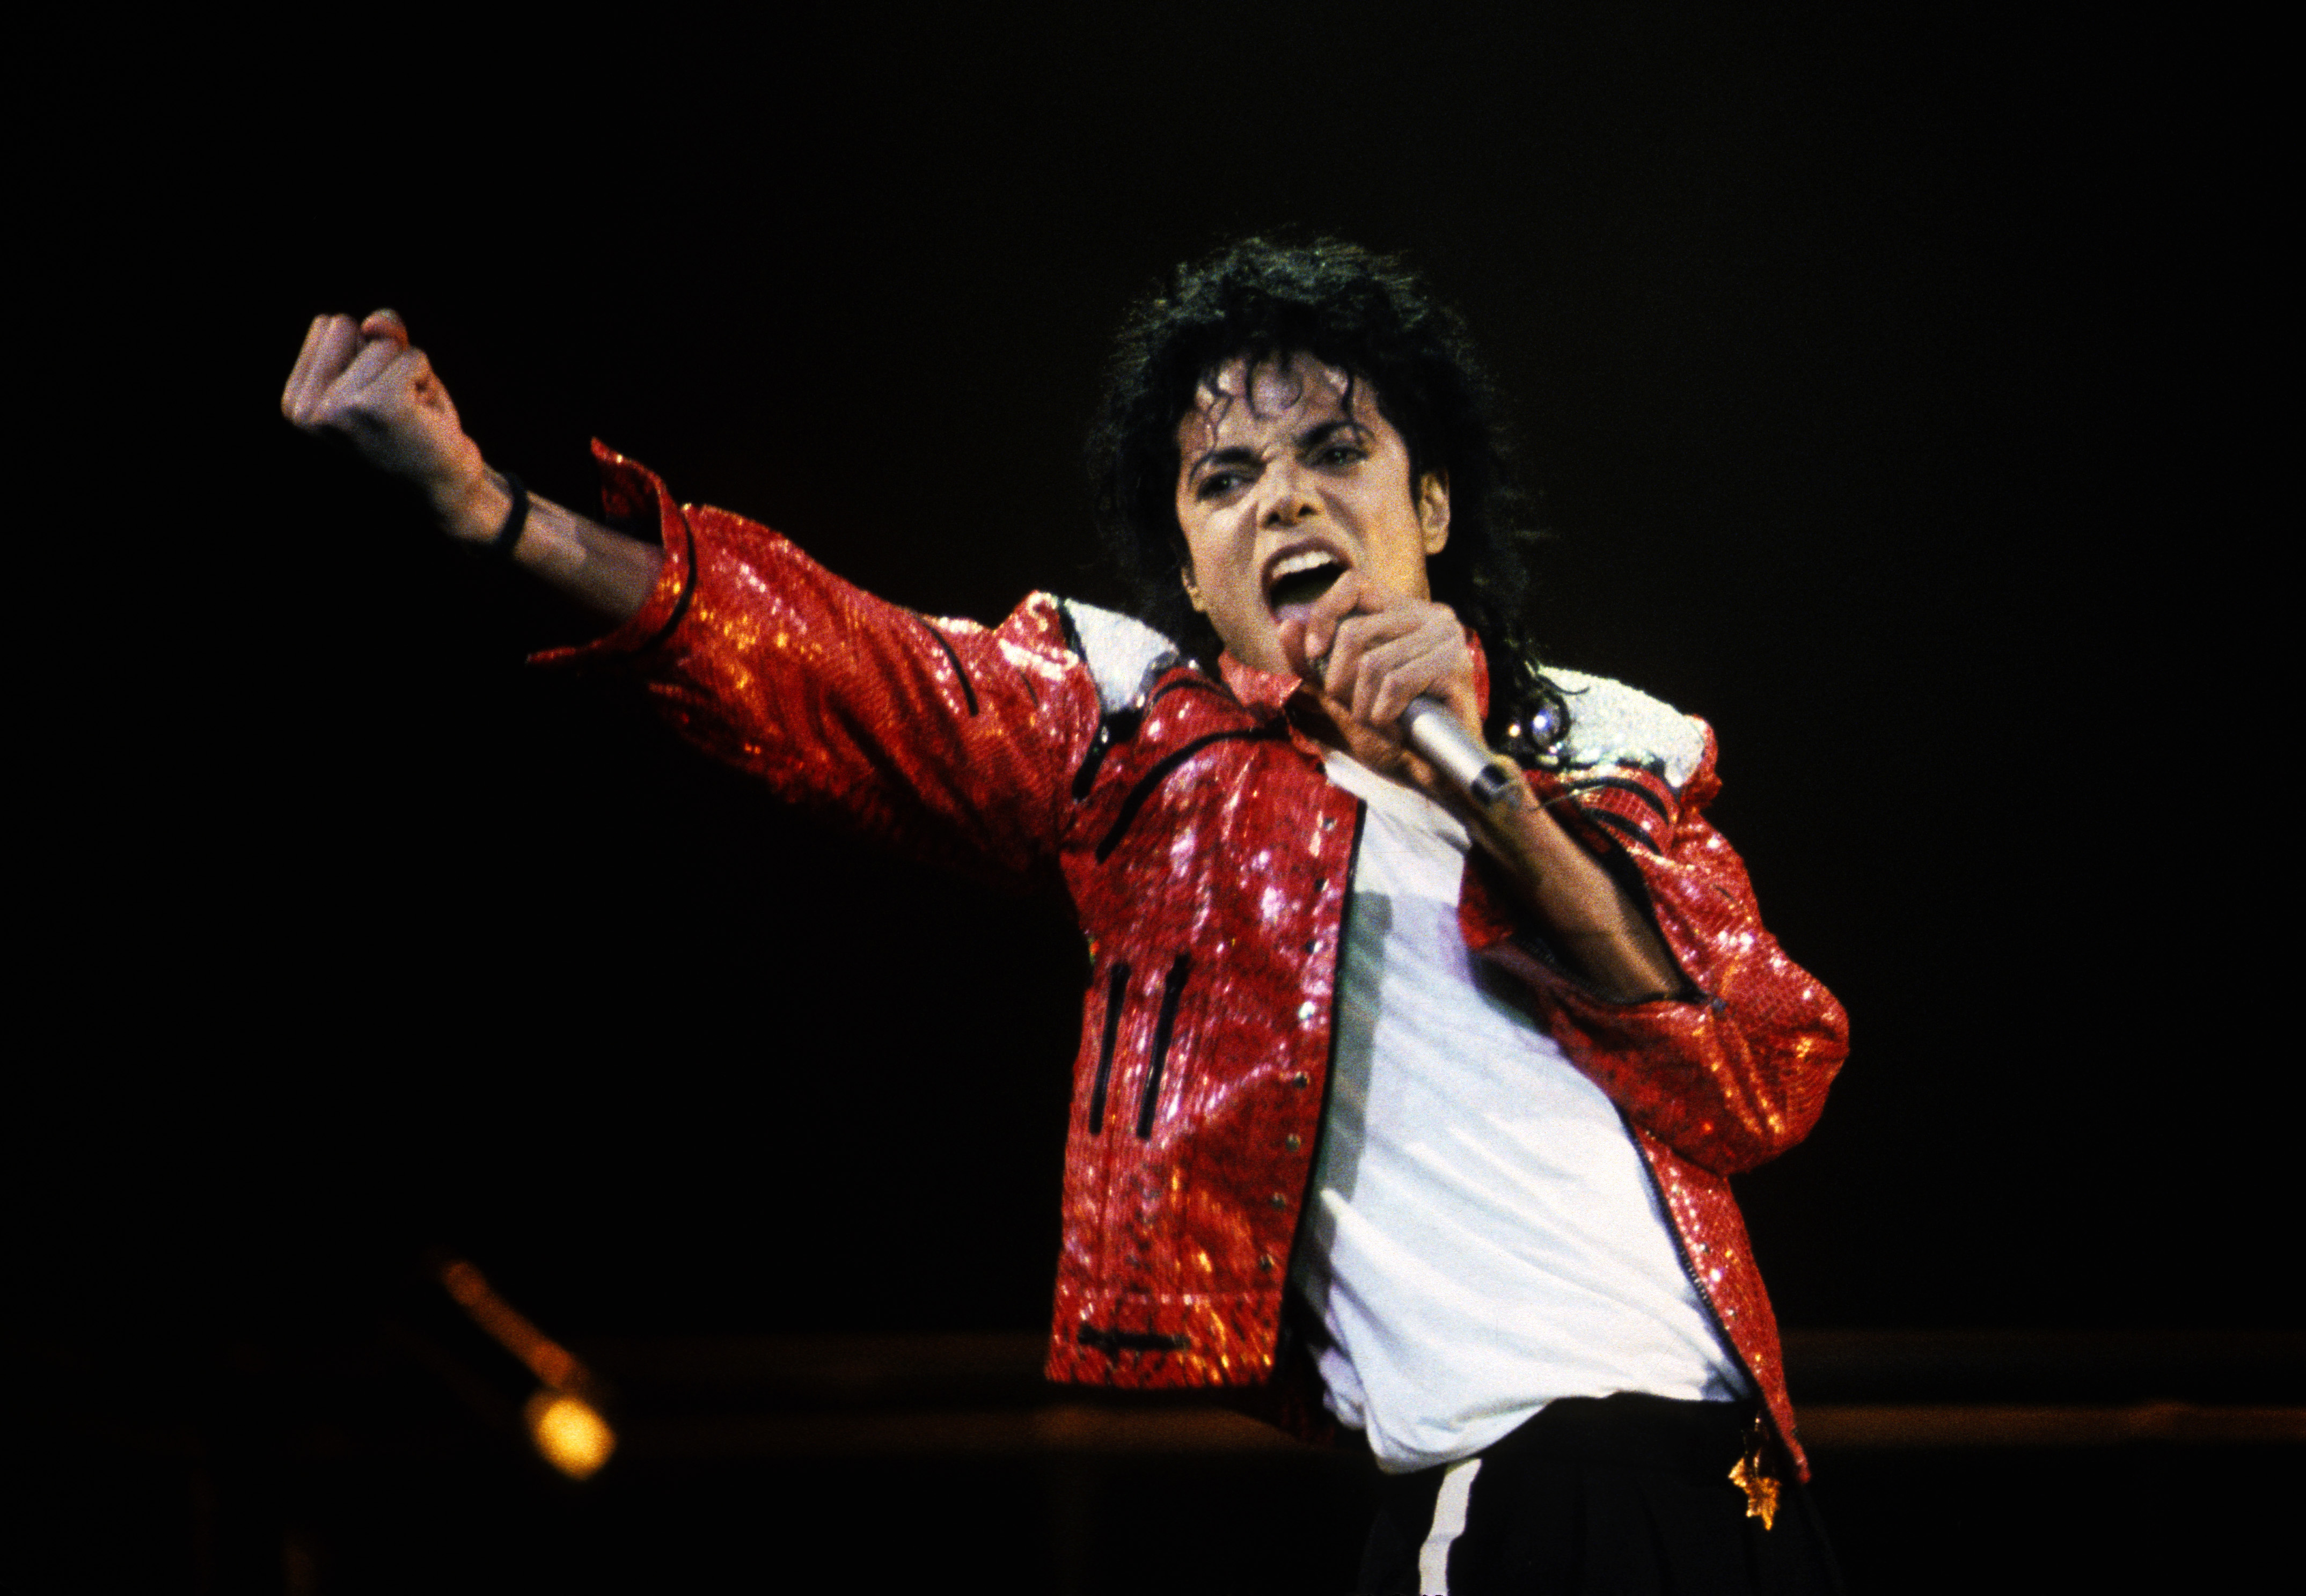 Michael Jackson is pictured performing in concert, circa 1986. | Source: Getty Images